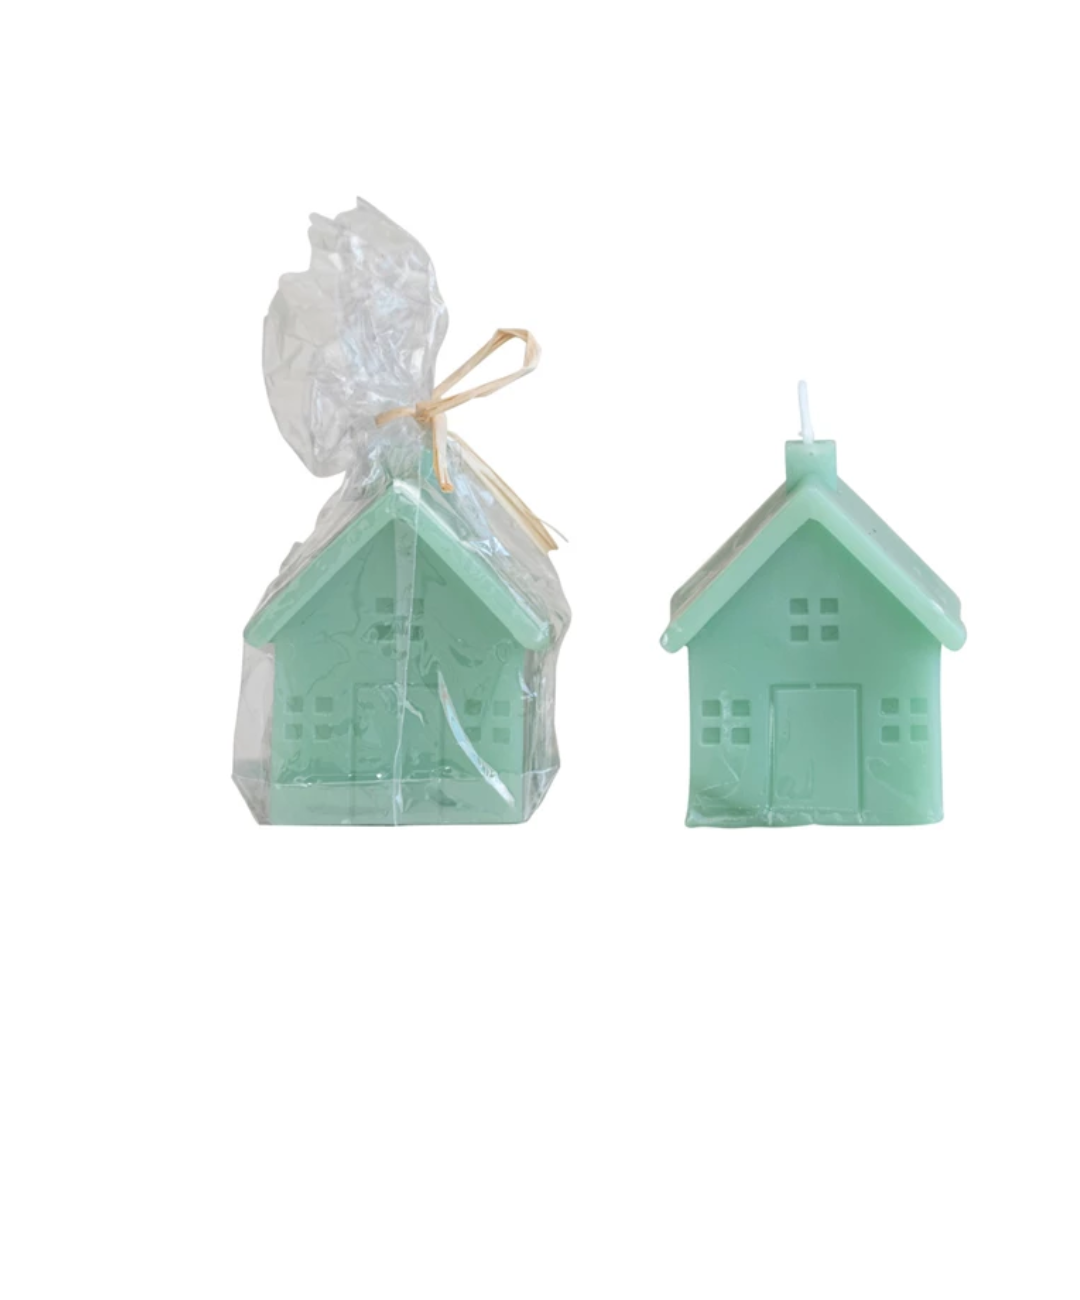 5" House Candle - Multiple Colors